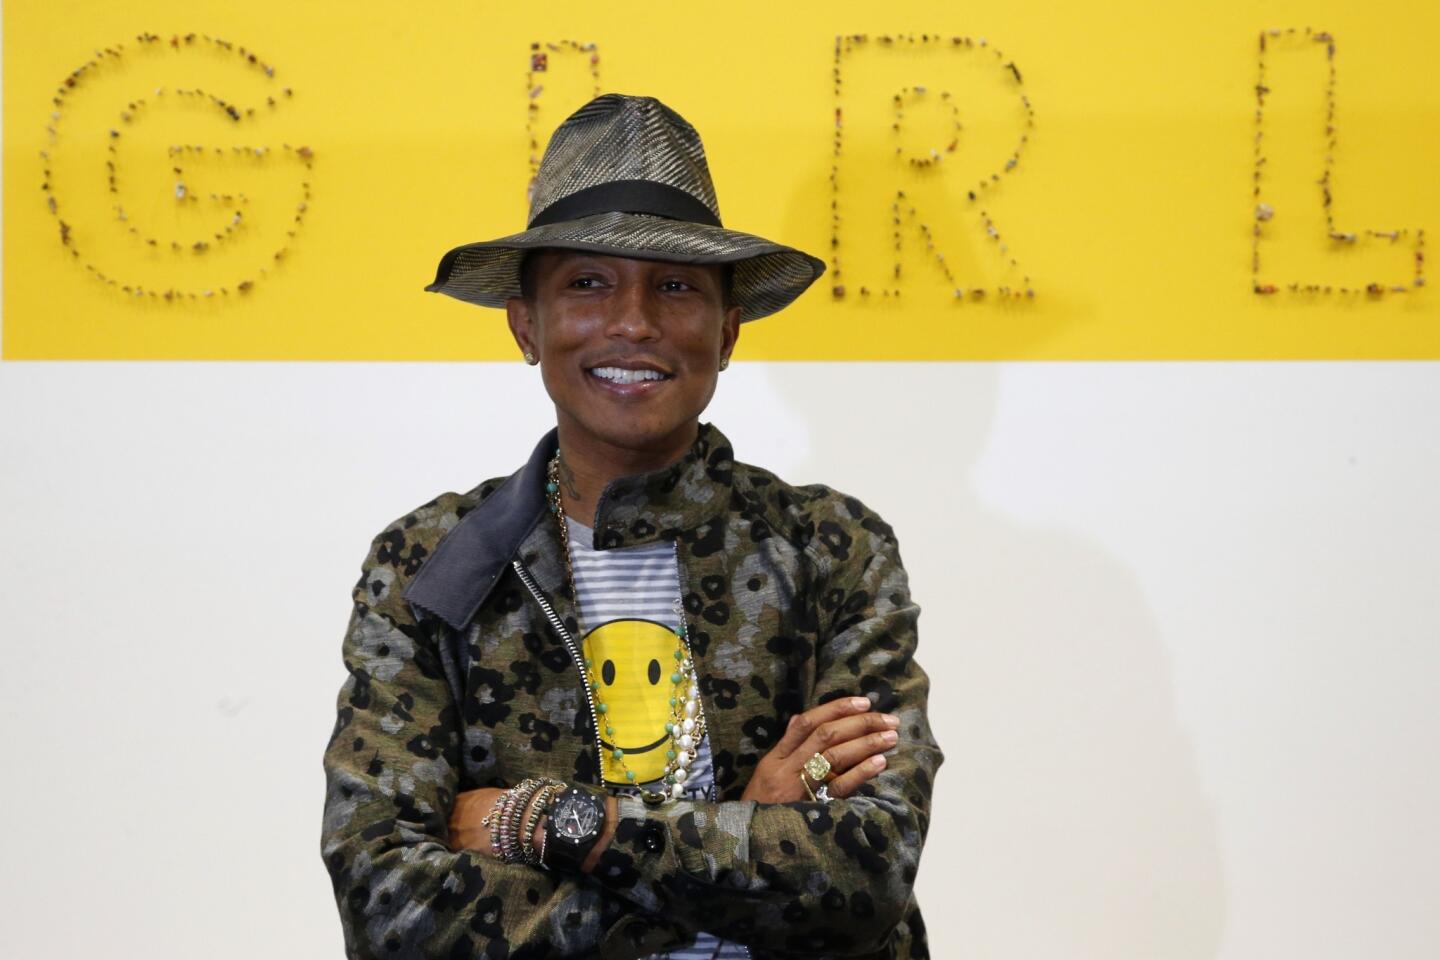 Fans not happy after Pharrell photo shoot